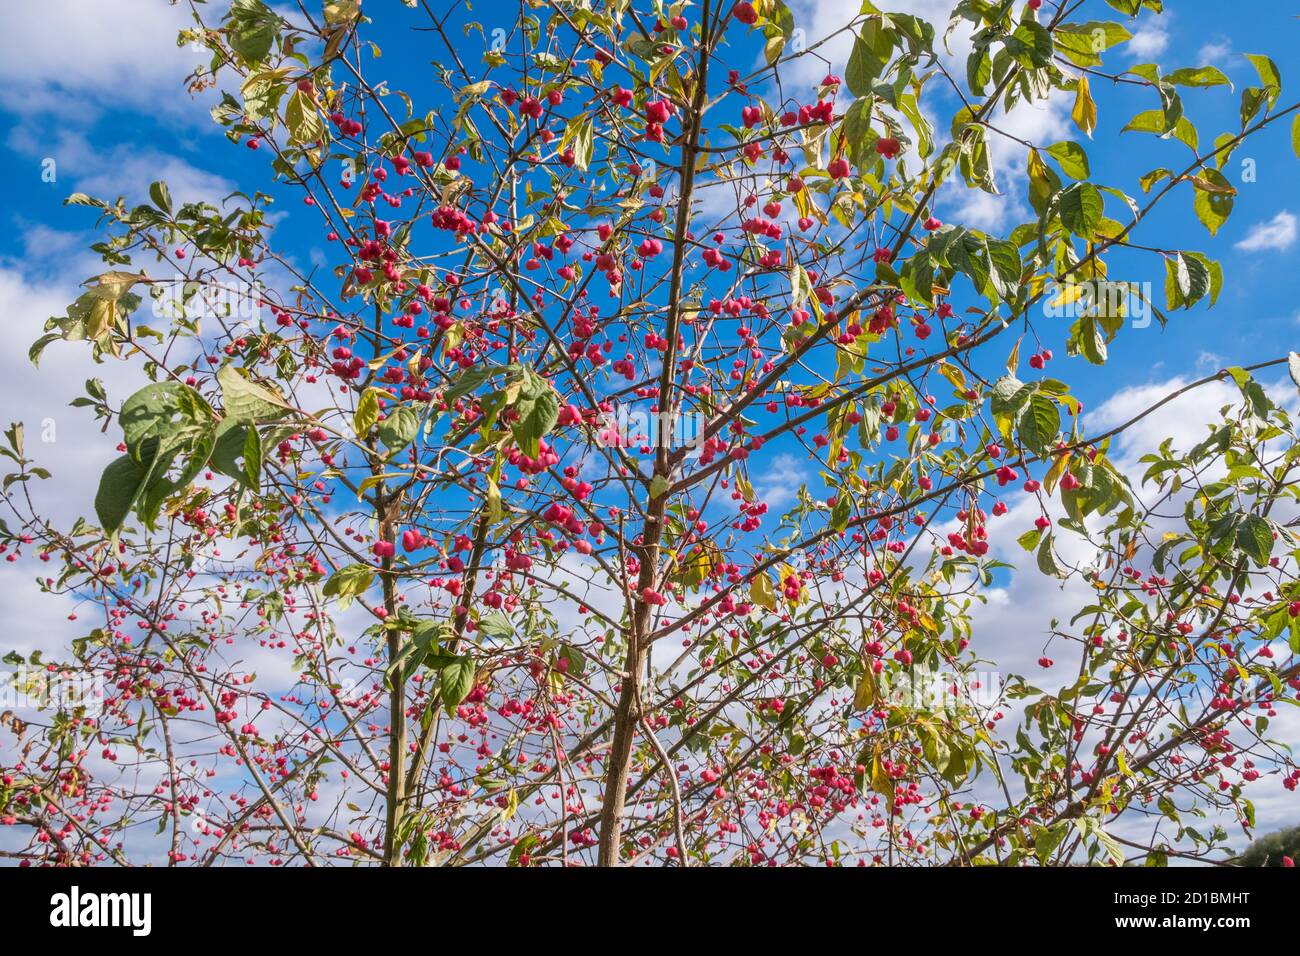 Spindle tree or spindle bush, Euonymous Europaeus,  full of red berries in the autumn. Also known as European Spindle / Common Spindle. Suffolk, UK. Stock Photo